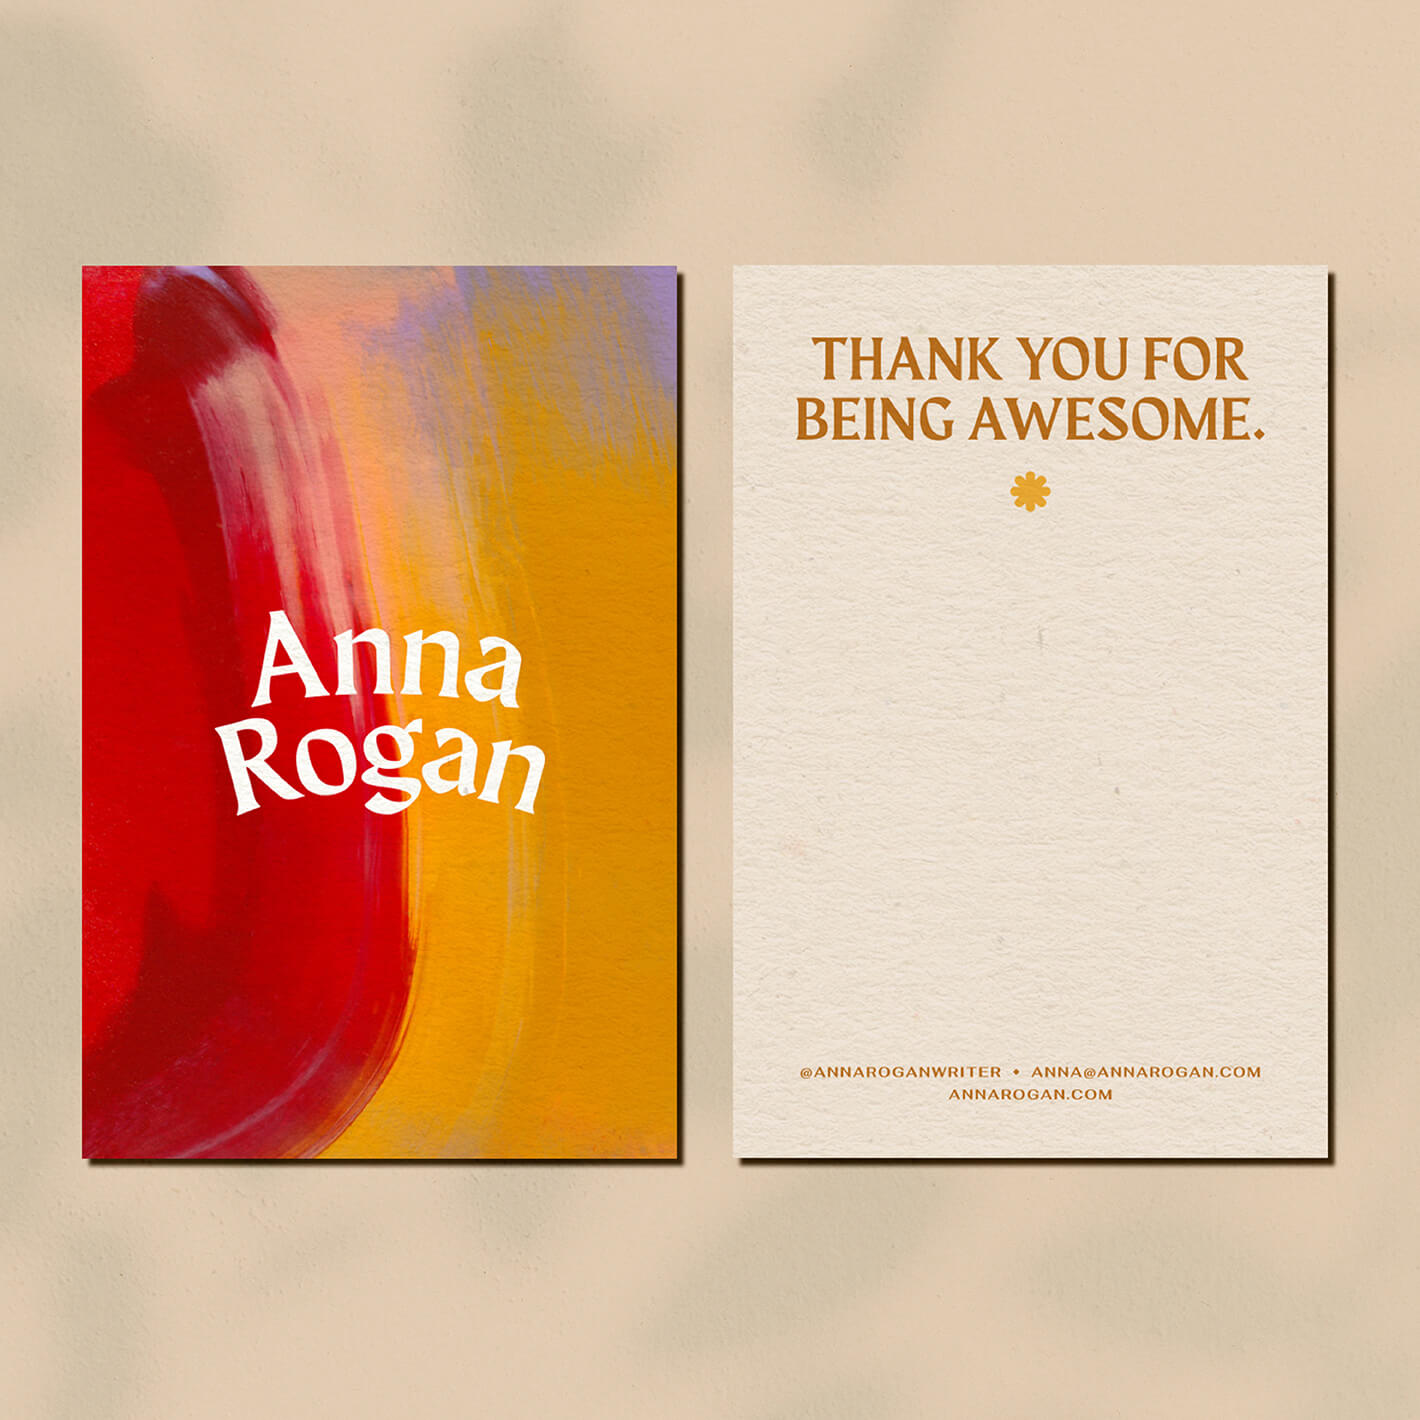 Hand rendered paint smears for custom brand identity for Anna Rogan thank you cards